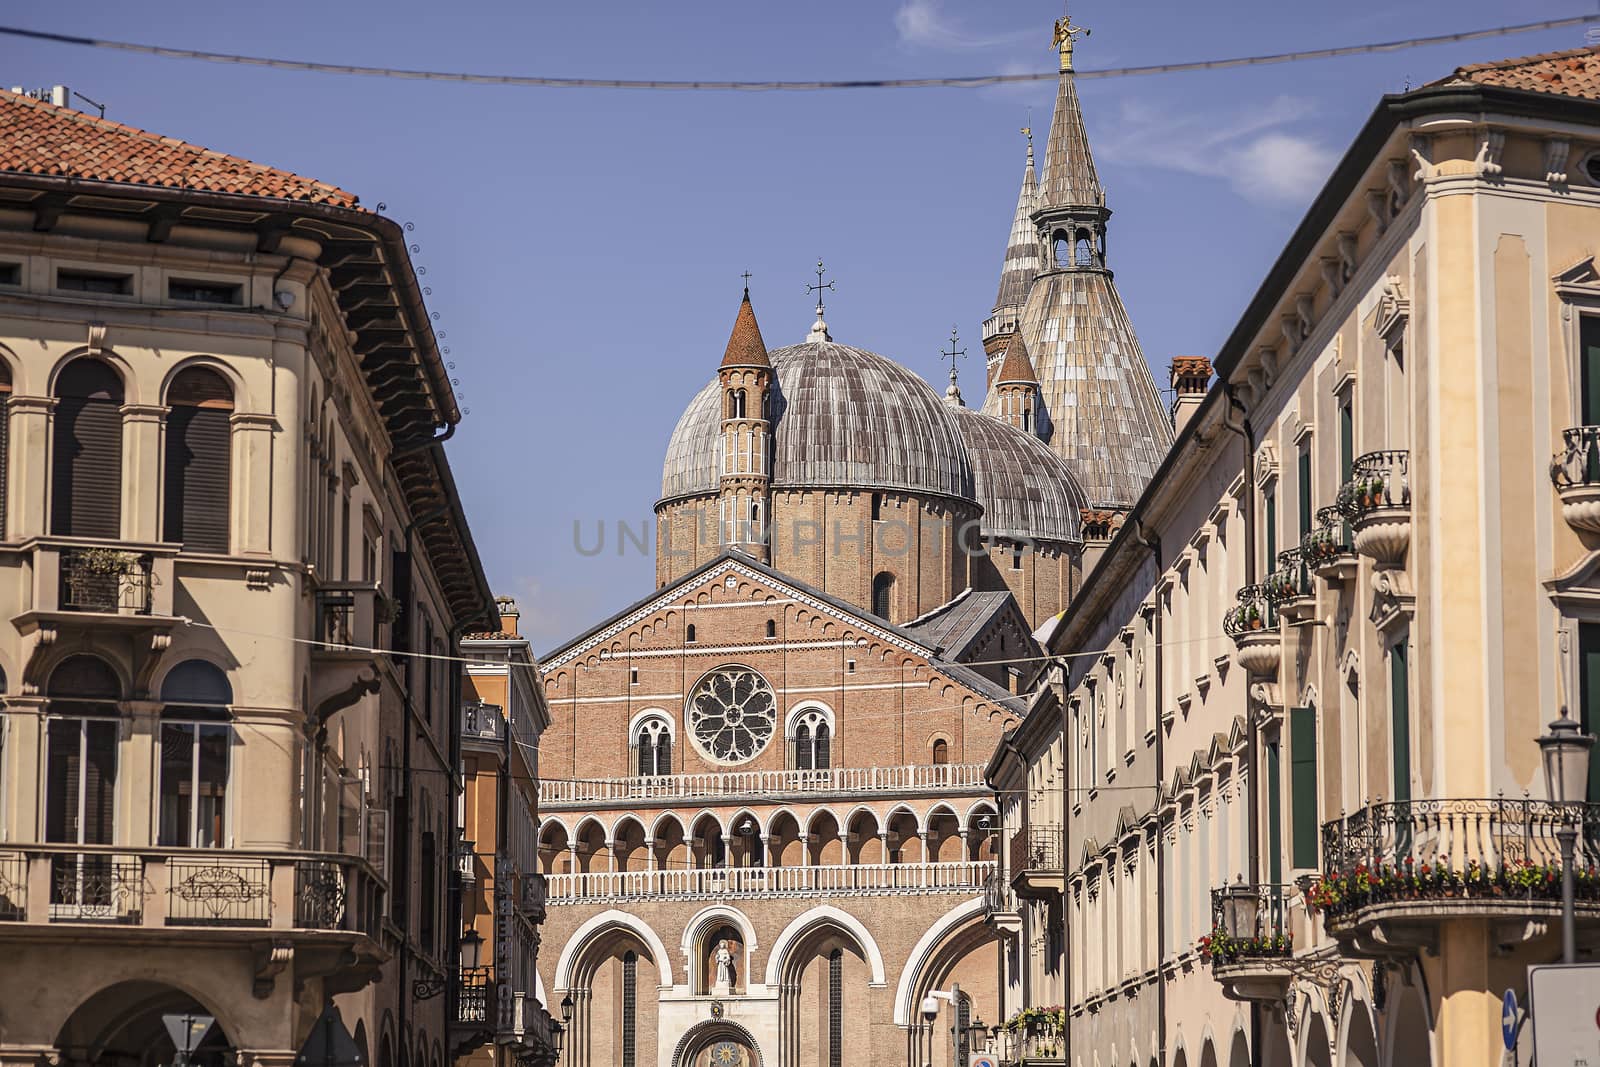 Saint Antony cathedral in Padua, Italy by pippocarlot